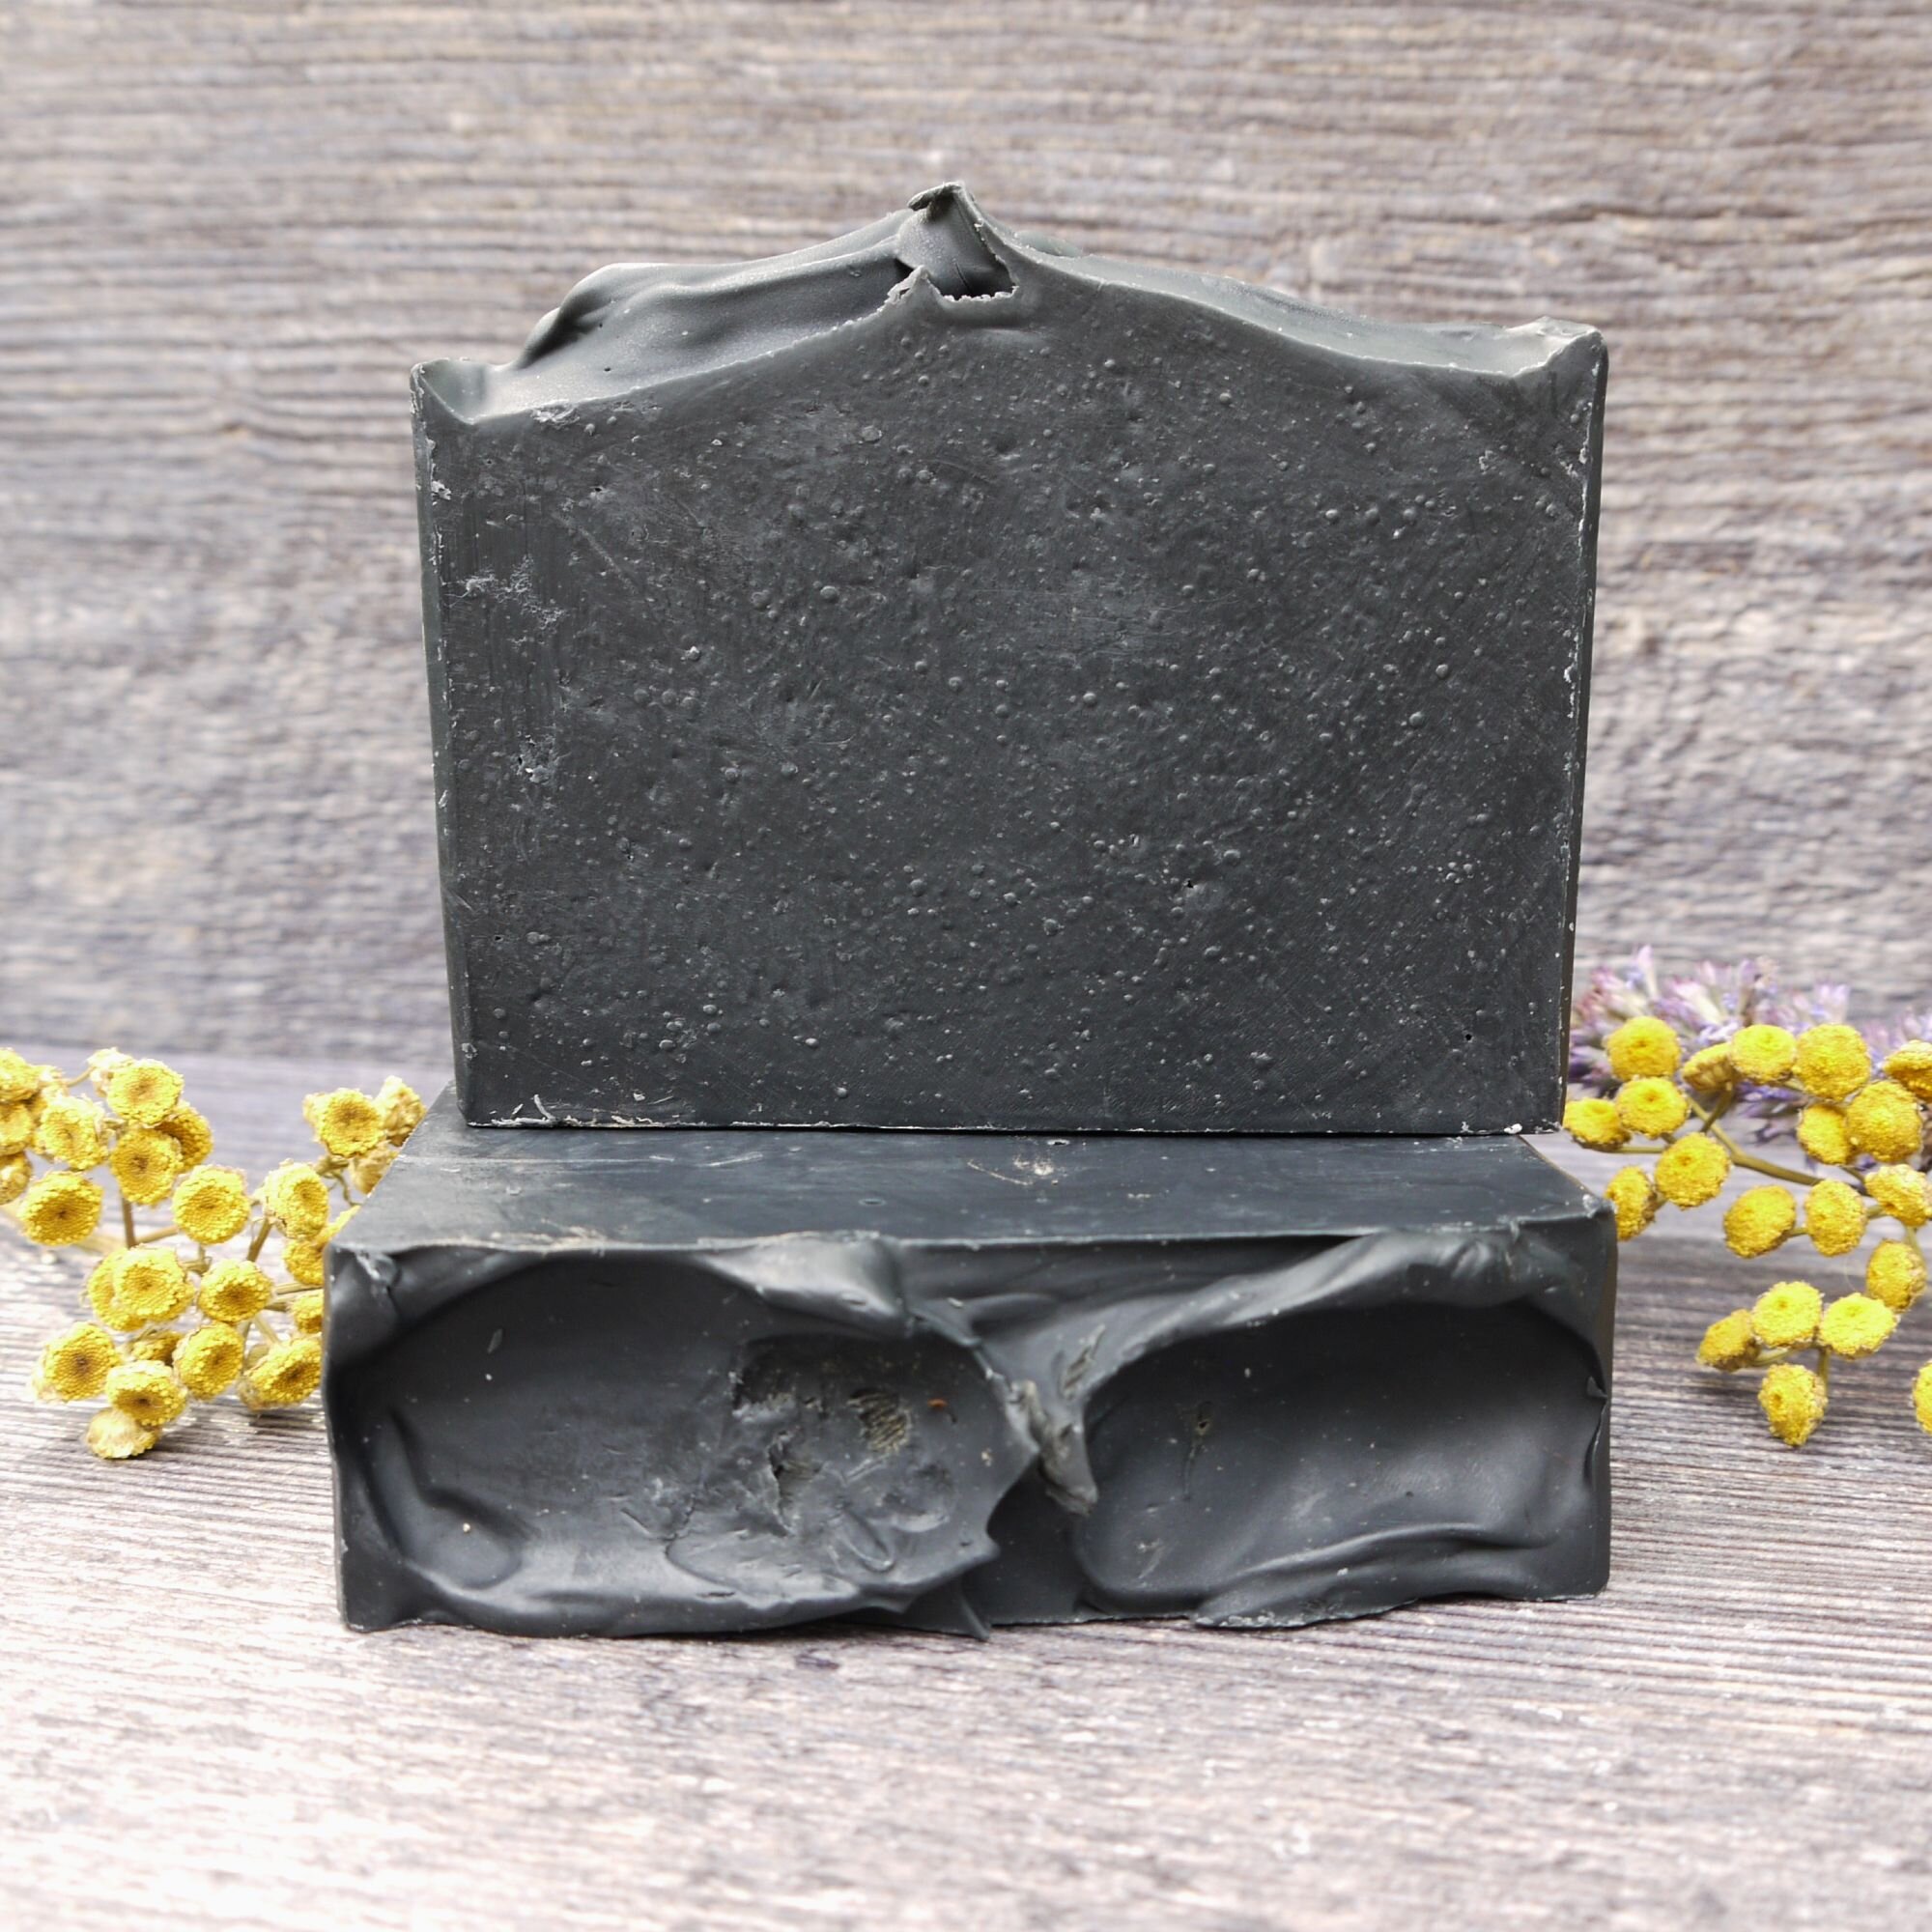 Lemongrass and Lavender Essential Oil Activated Charcoal Black Soap